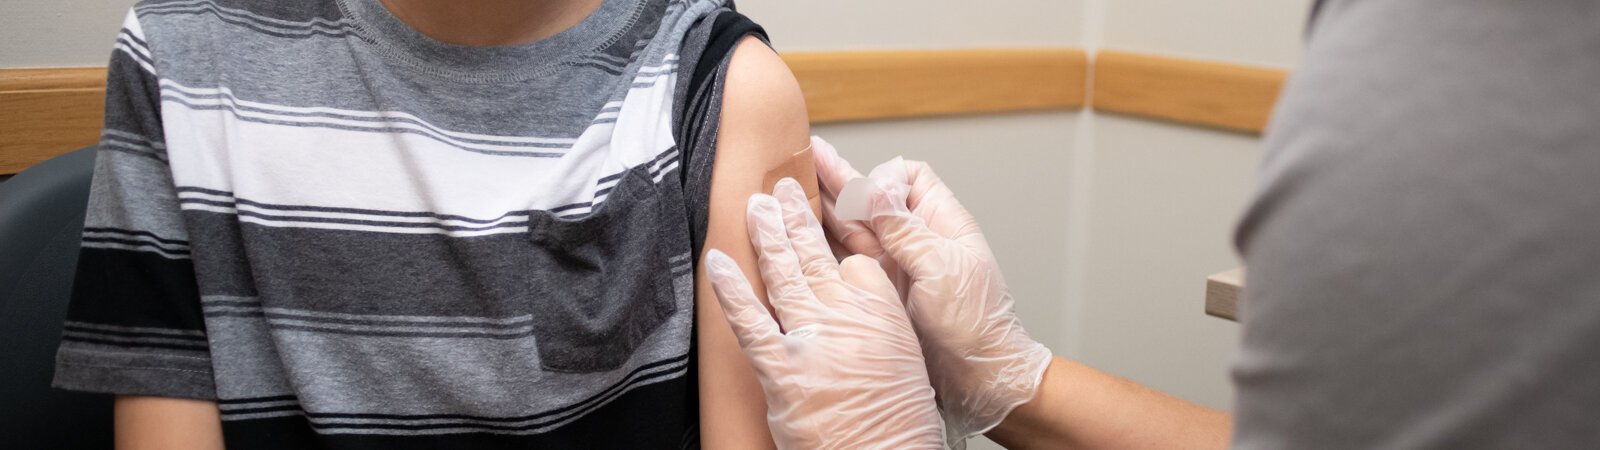 Many students going back to school this fall are behind on routine vaccinations, according to Super Shot at 1515 Hobson Rd.